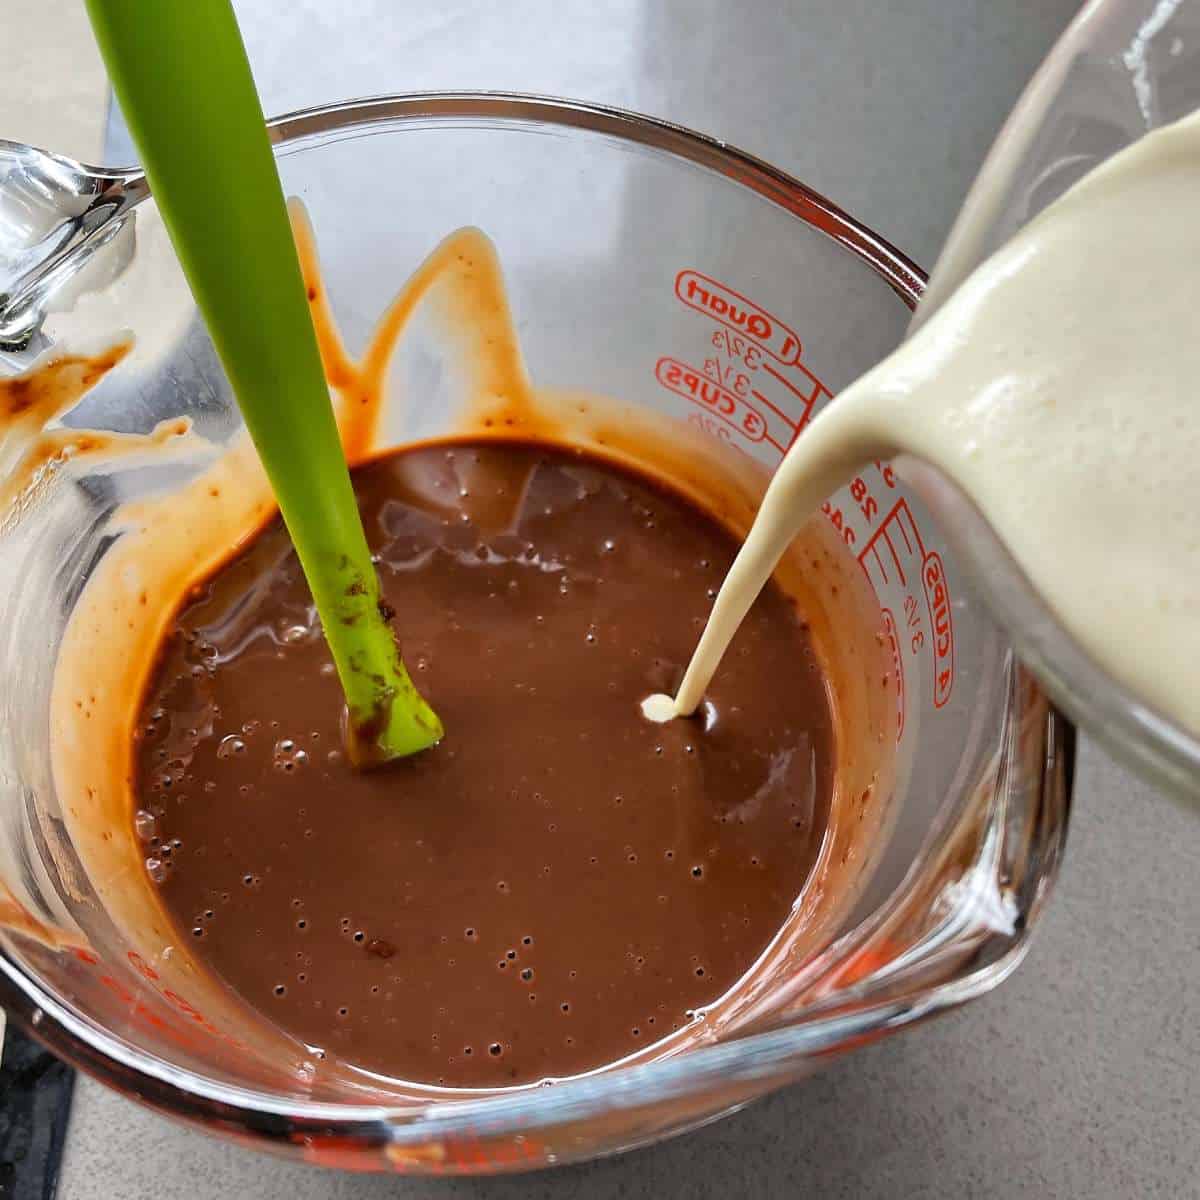 Cream being added into the chocolate cream mixture